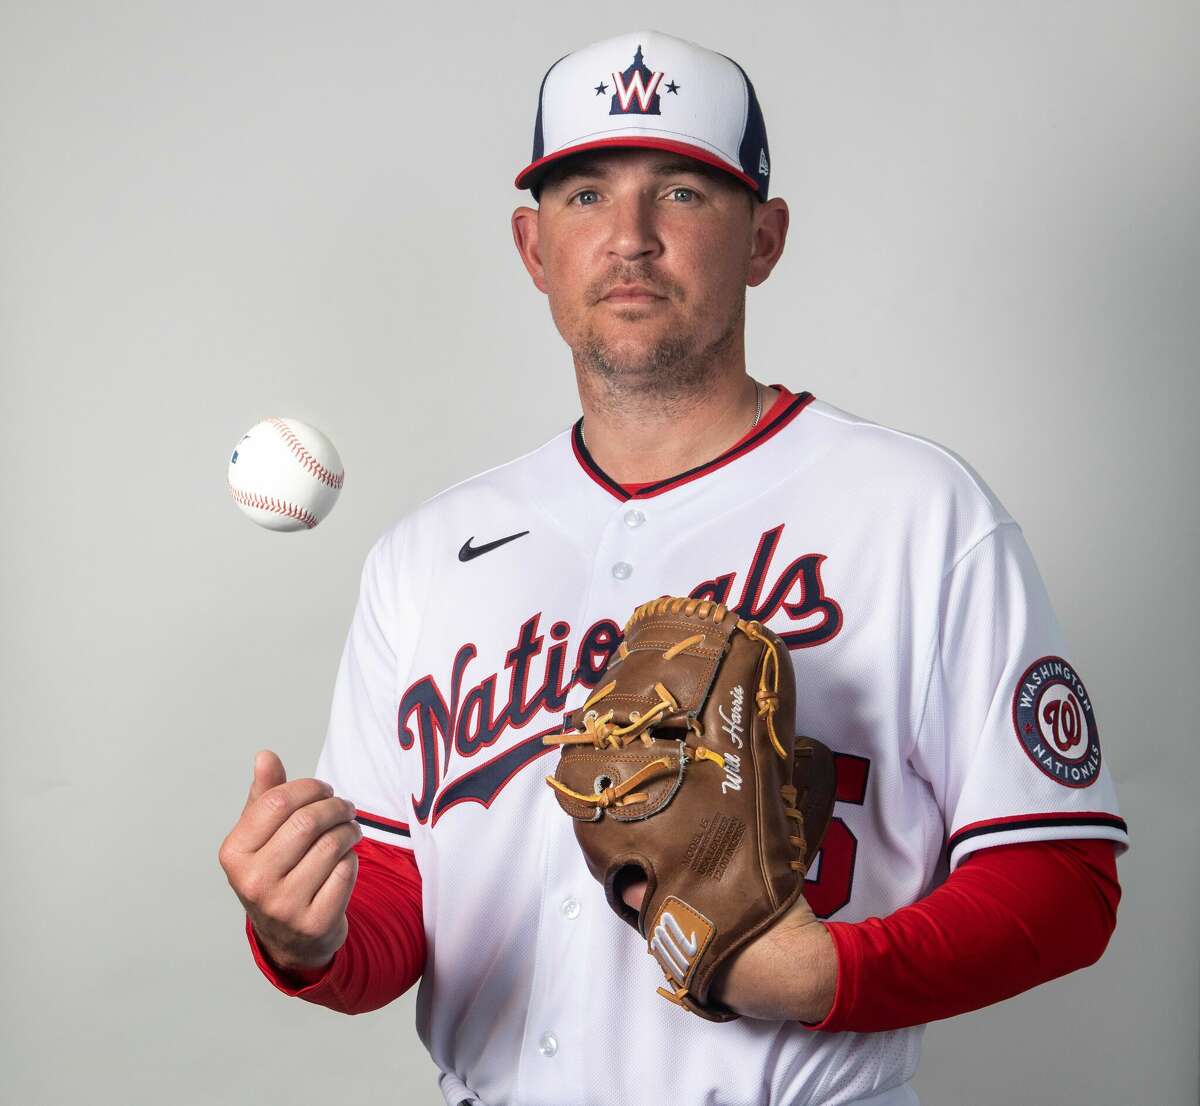 Will Harris of the Washington Nationals poses during Photo Day at The Ballpark of the Palm Beaches on March 17, 2022 in West Palm Beach, Florida.